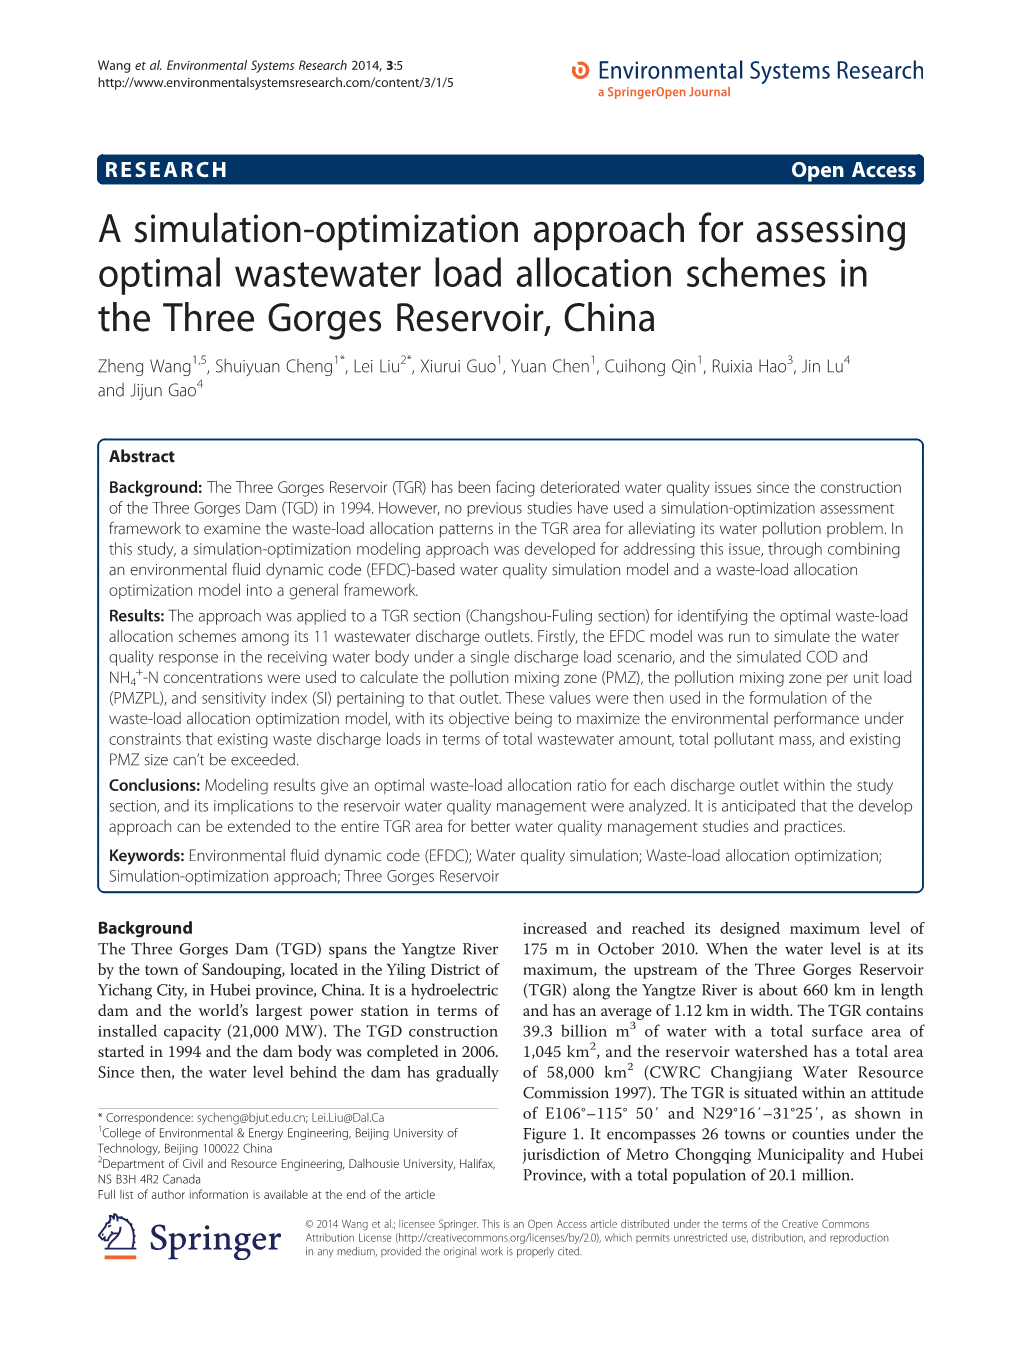 A Simulation-Optimization Approach for Assessing Optimal Wastewater Load